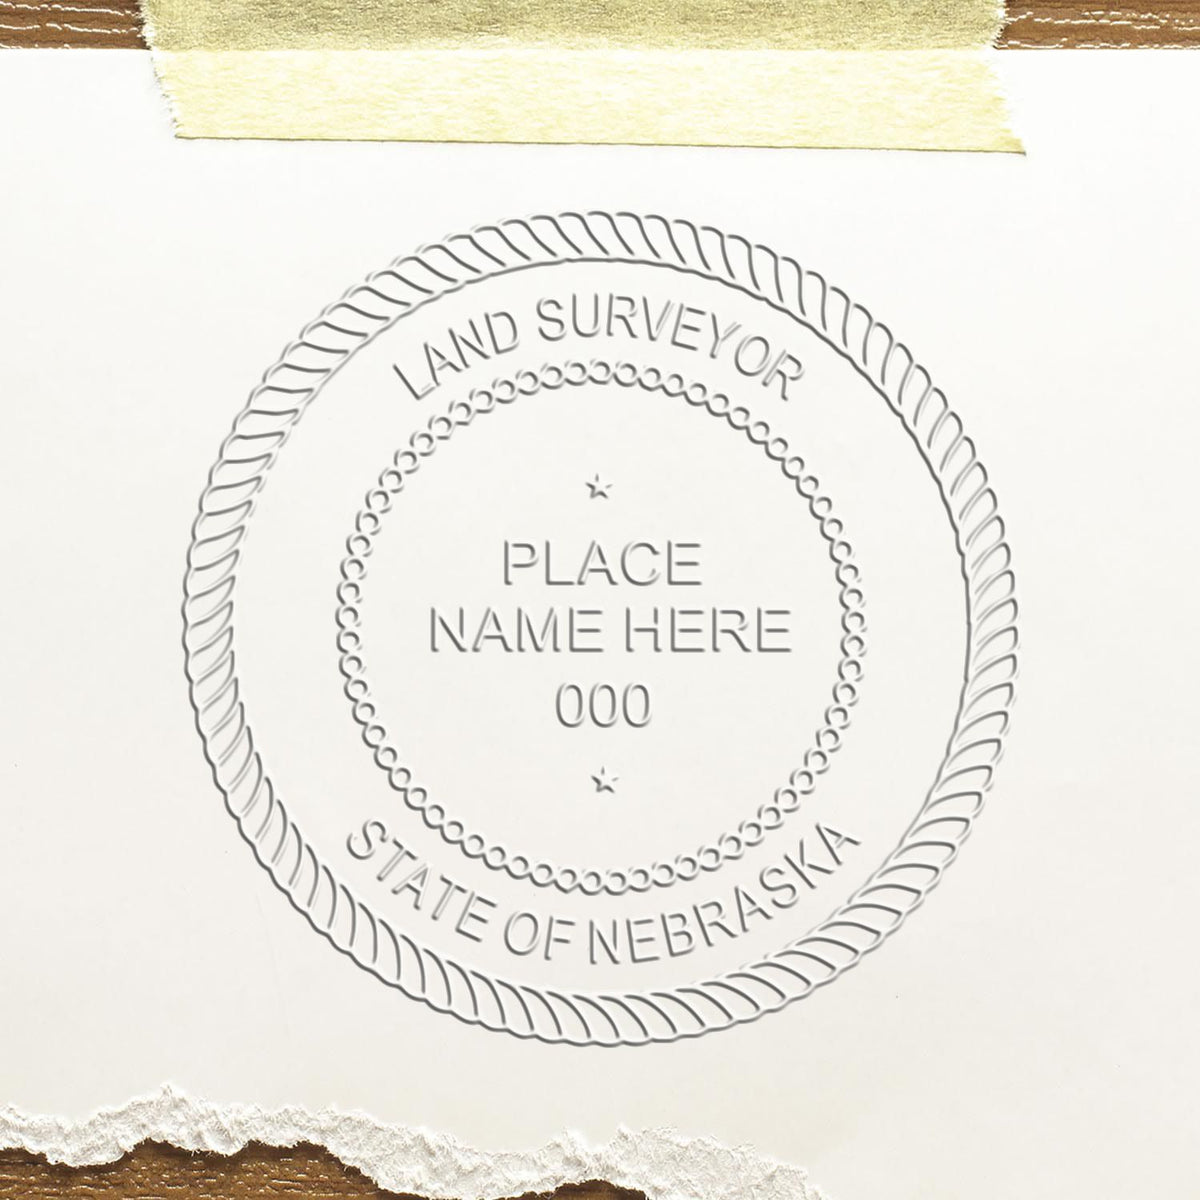 Another Example of a stamped impression of the Heavy Duty Cast Iron Nebraska Land Surveyor Seal Embosser on a piece of office paper.